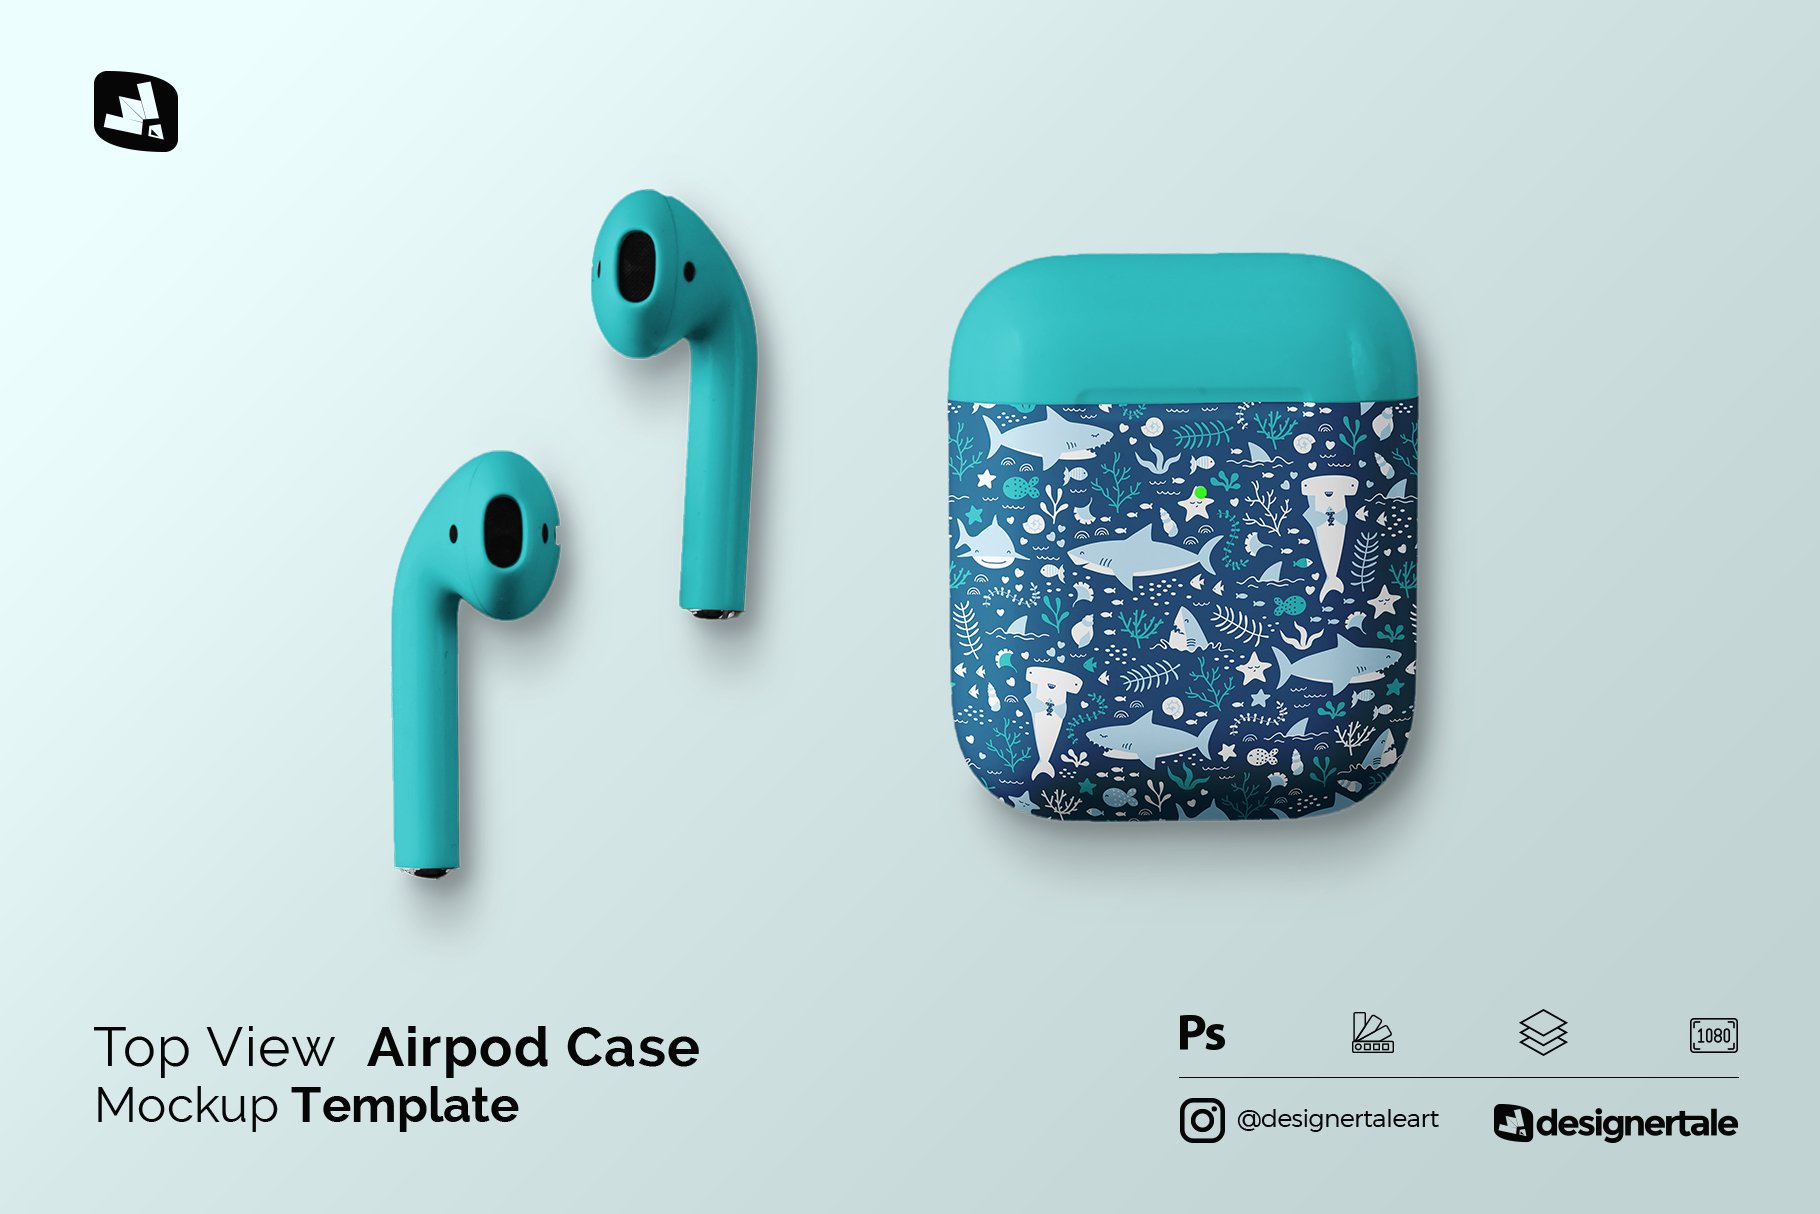 Top View Airpod Case Mockup cover image.